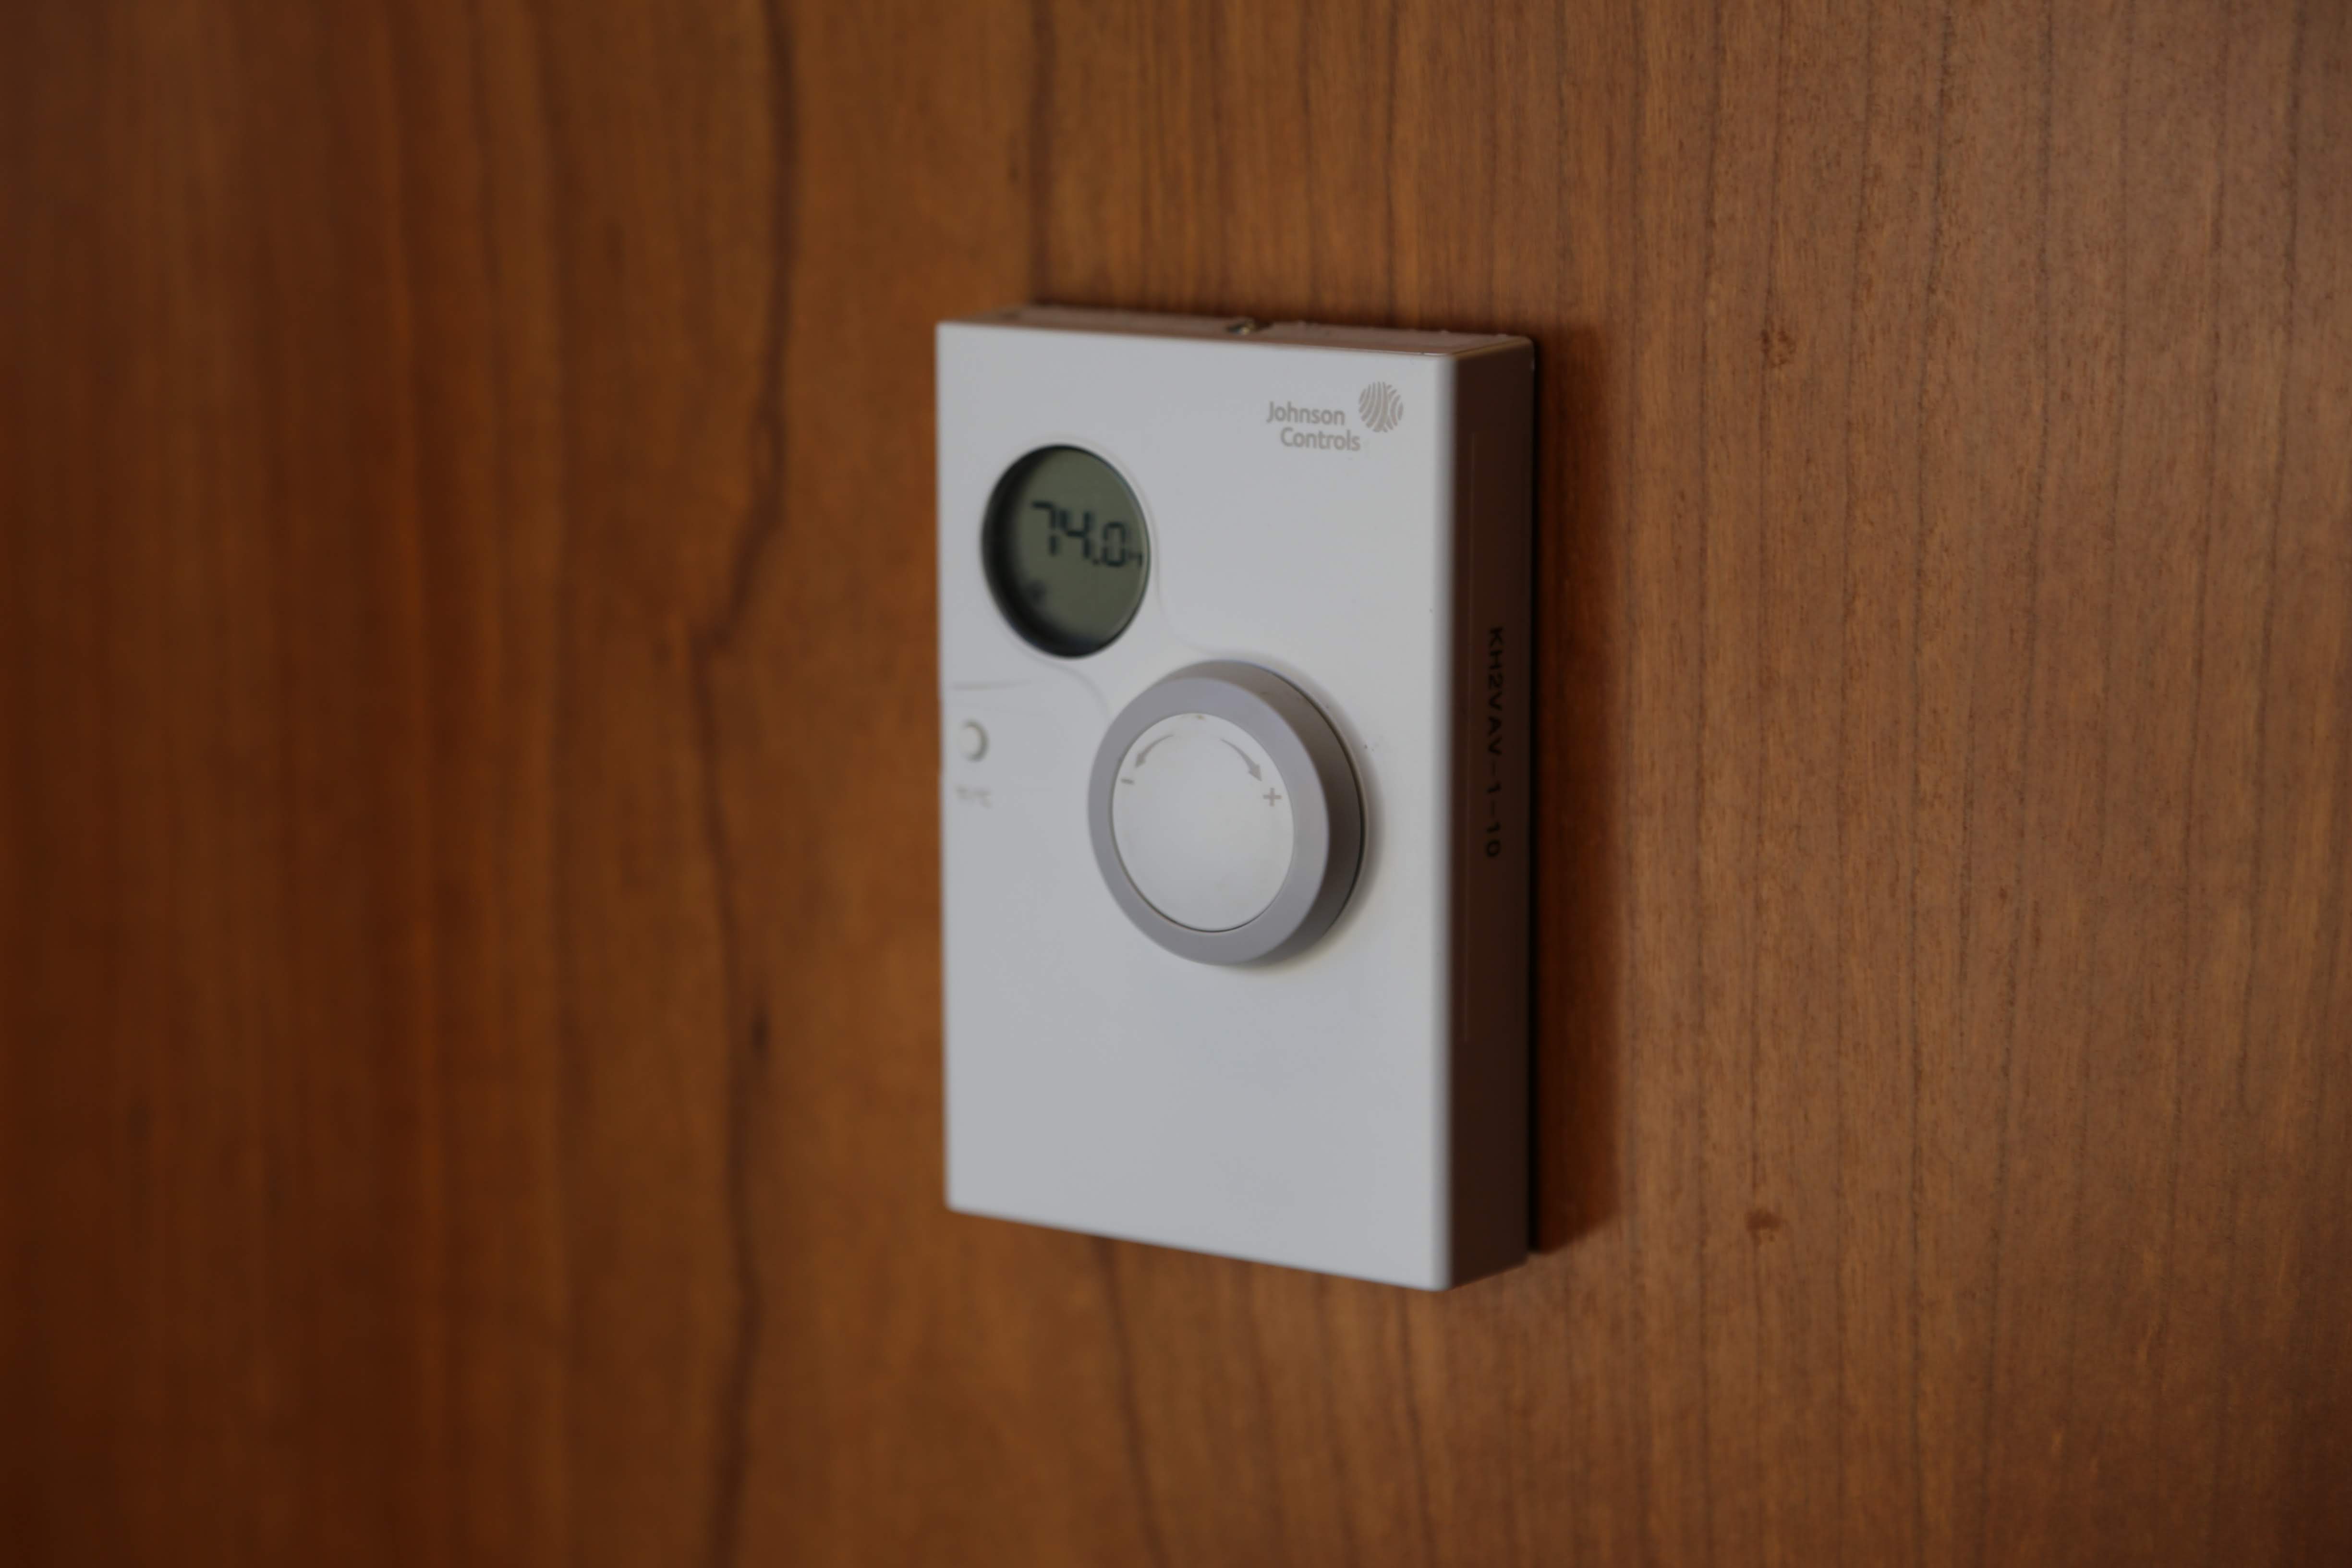 A thermostat in King Hall